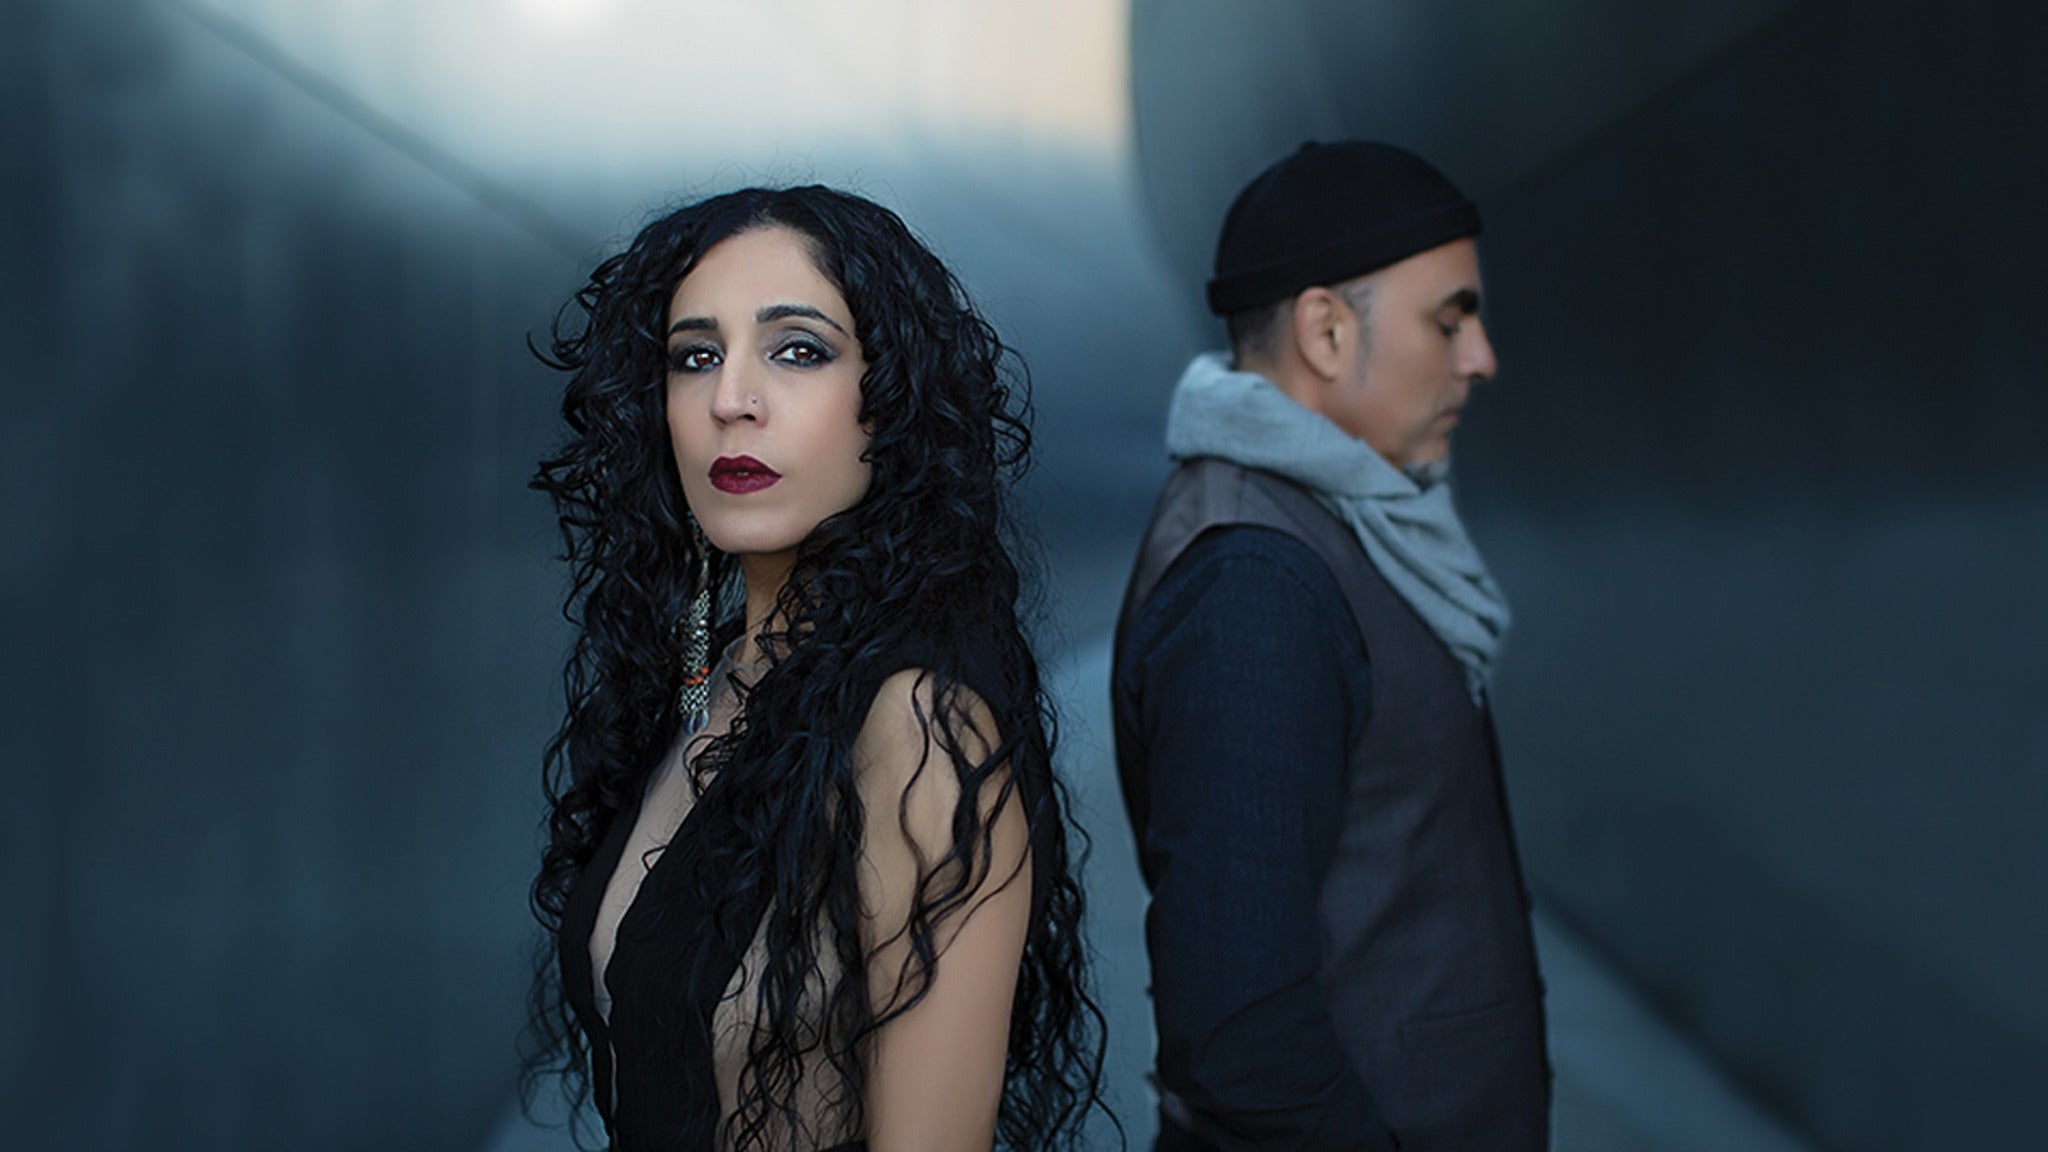 Niyaz in Tucson promo photo for Exclusive presale offer code